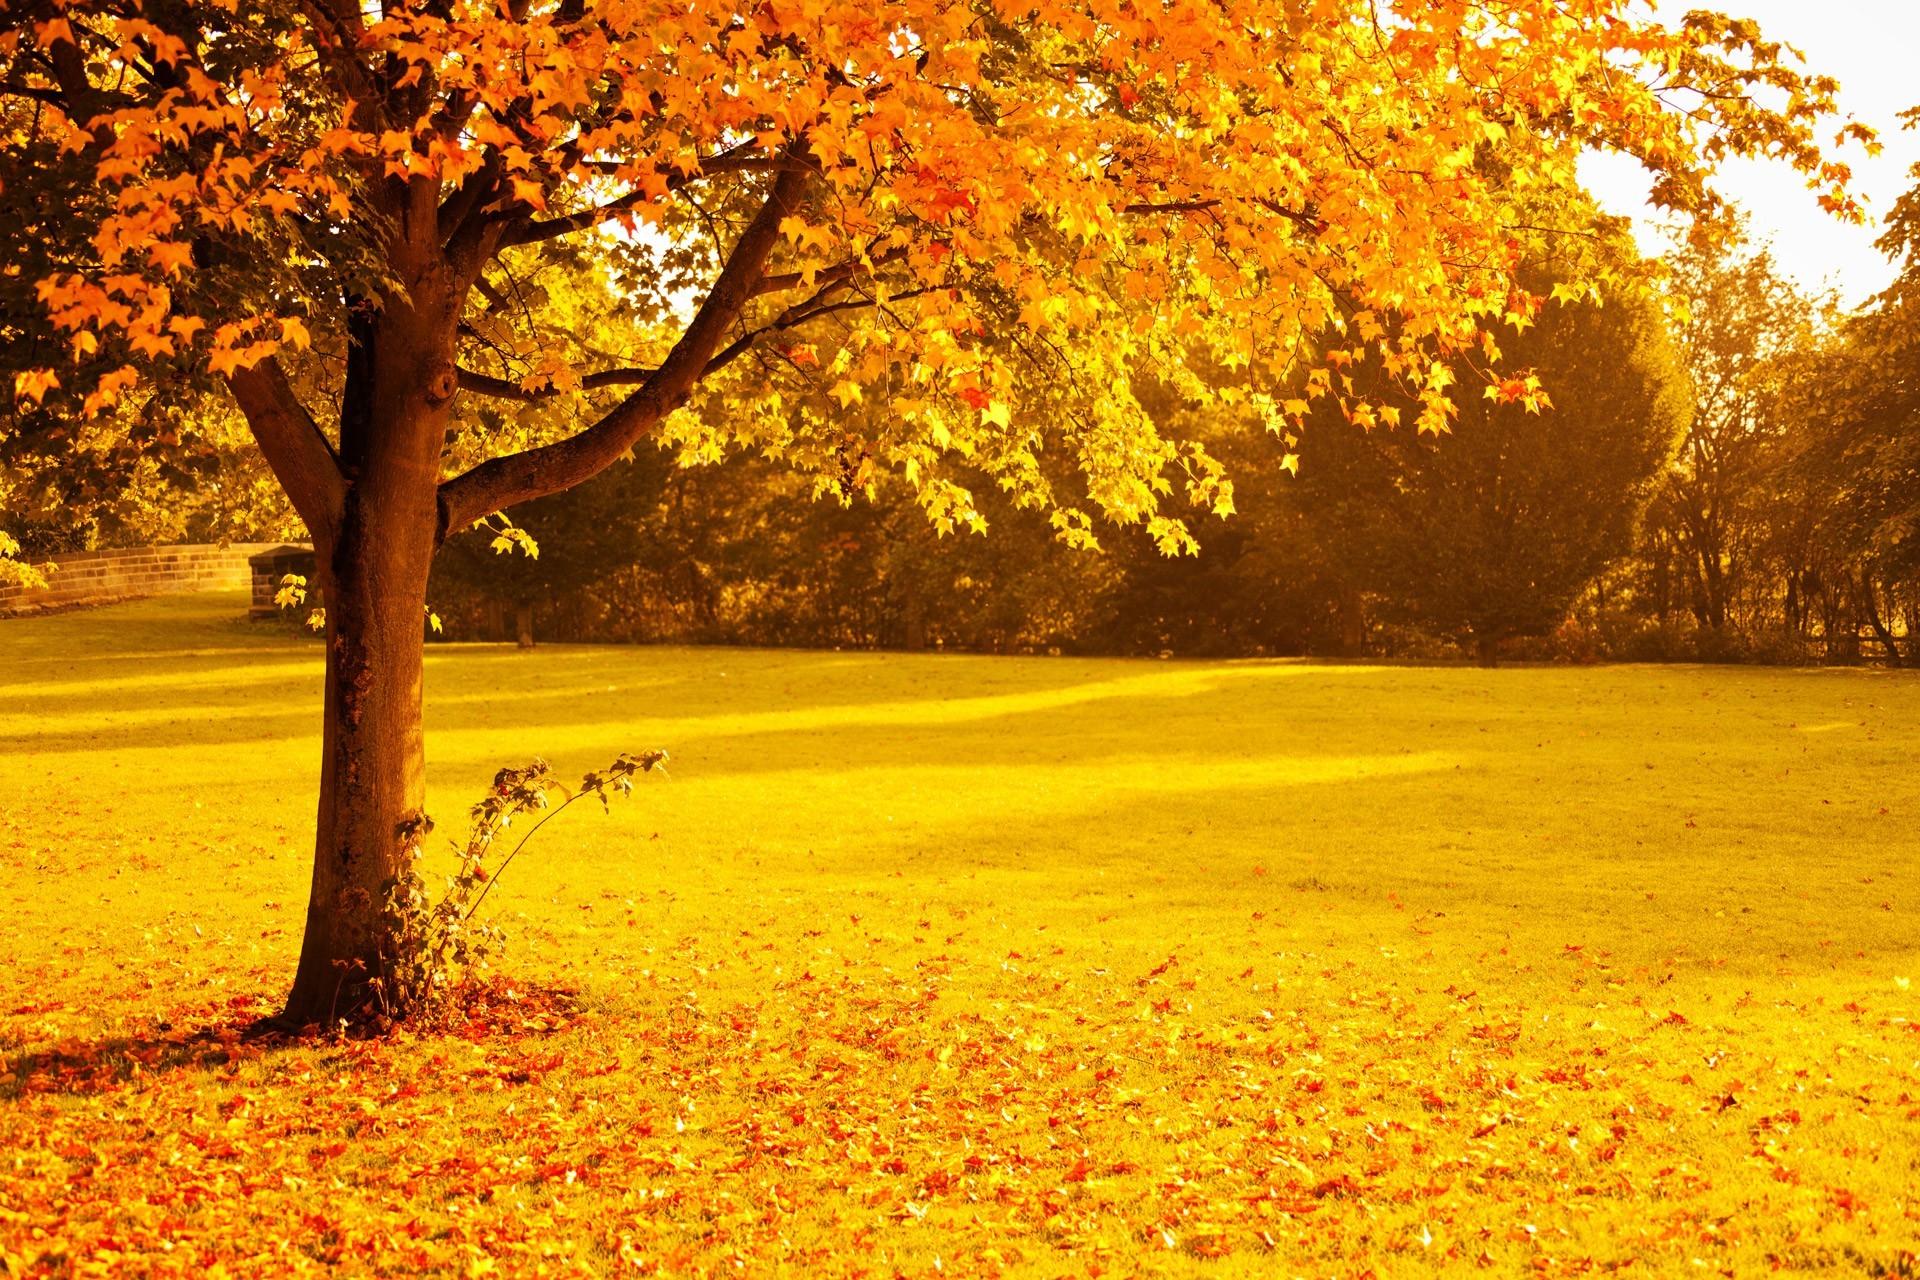 fall, Foliage, Gold, Leaves, Nature, Orange, Park, Red